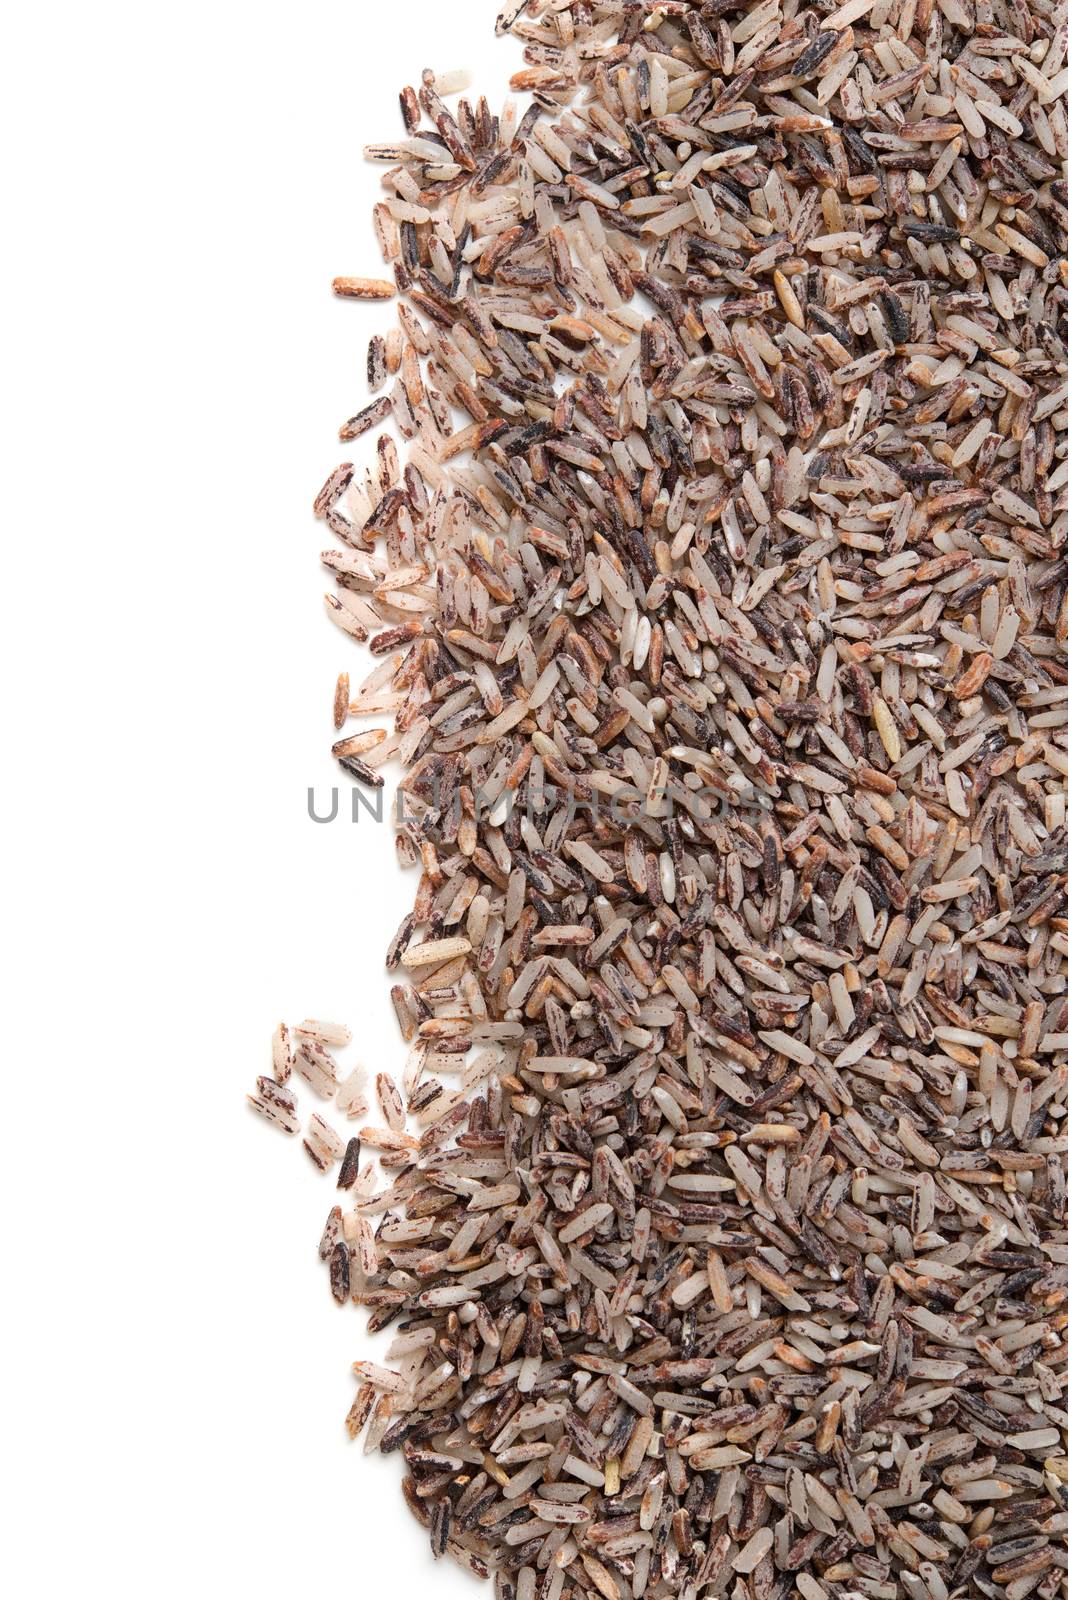 brown rice background by antpkr